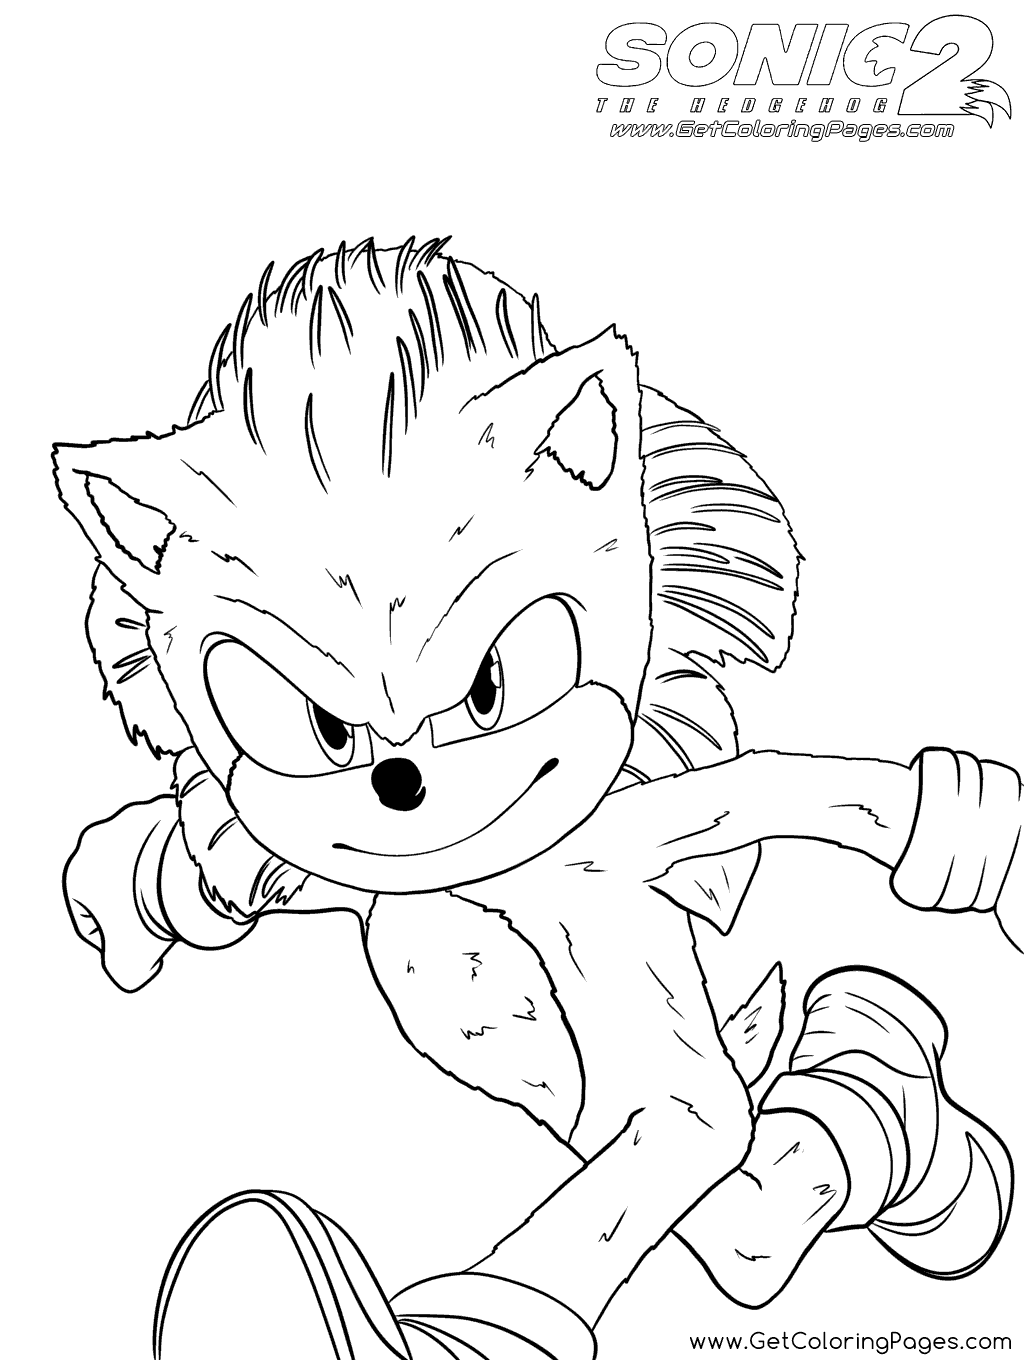 Sonic the hedgehog running coloring page